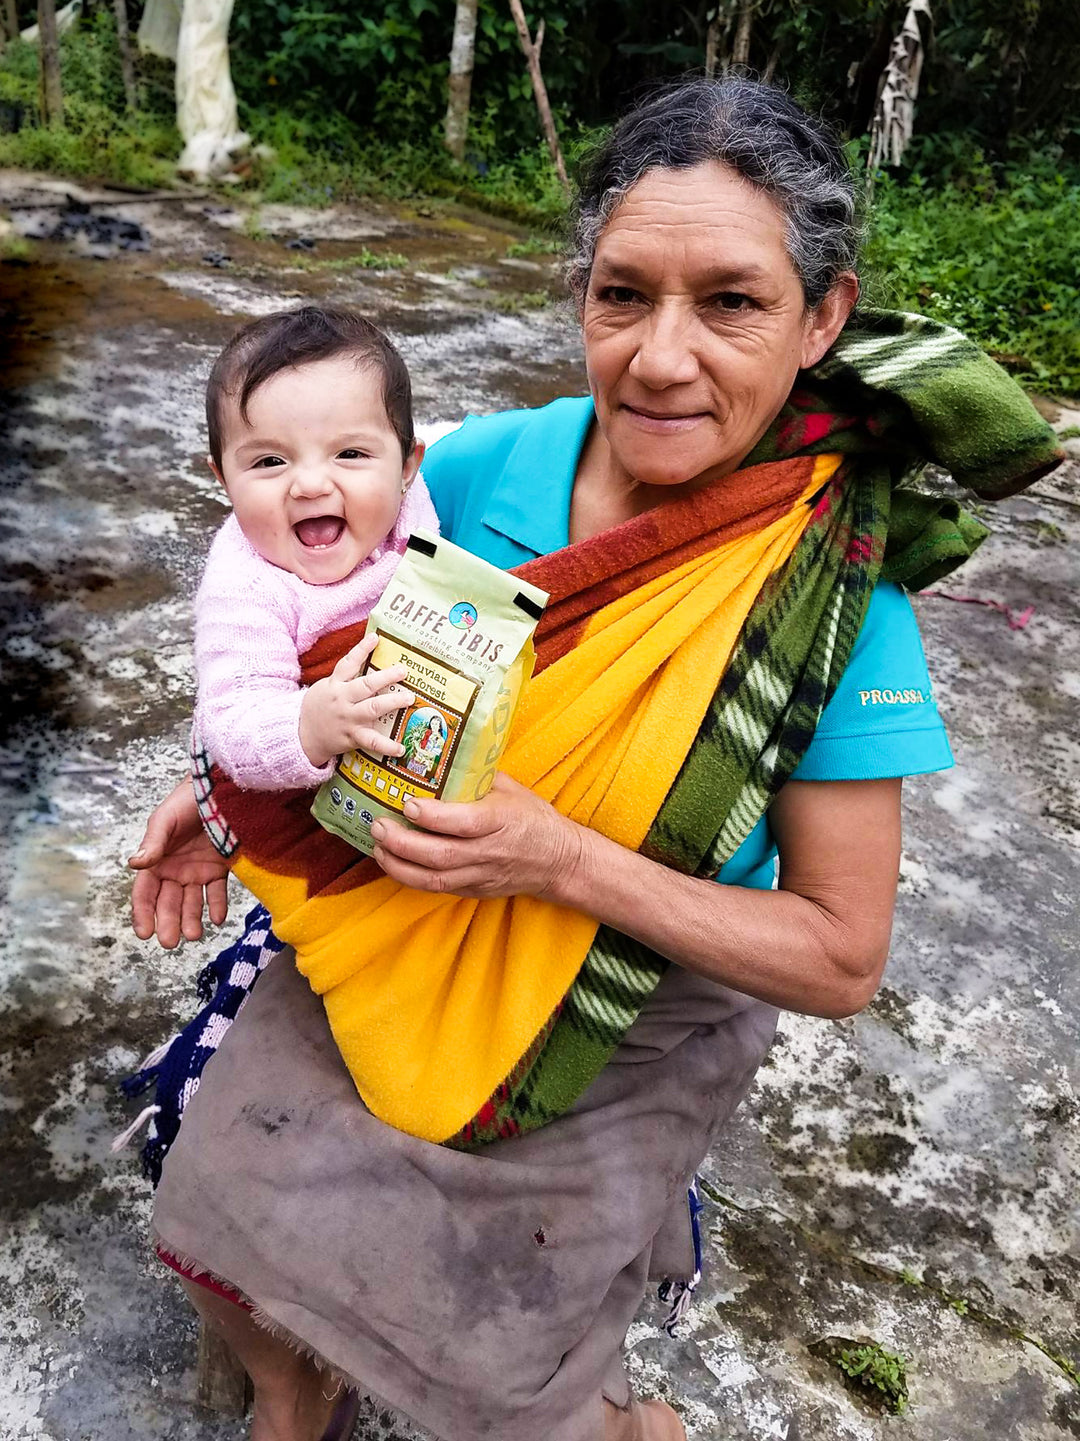 Image of peruvian coffee producer holding a baby and 12oz bag of Caffe Ibis Peruvian Rainforest coffee.